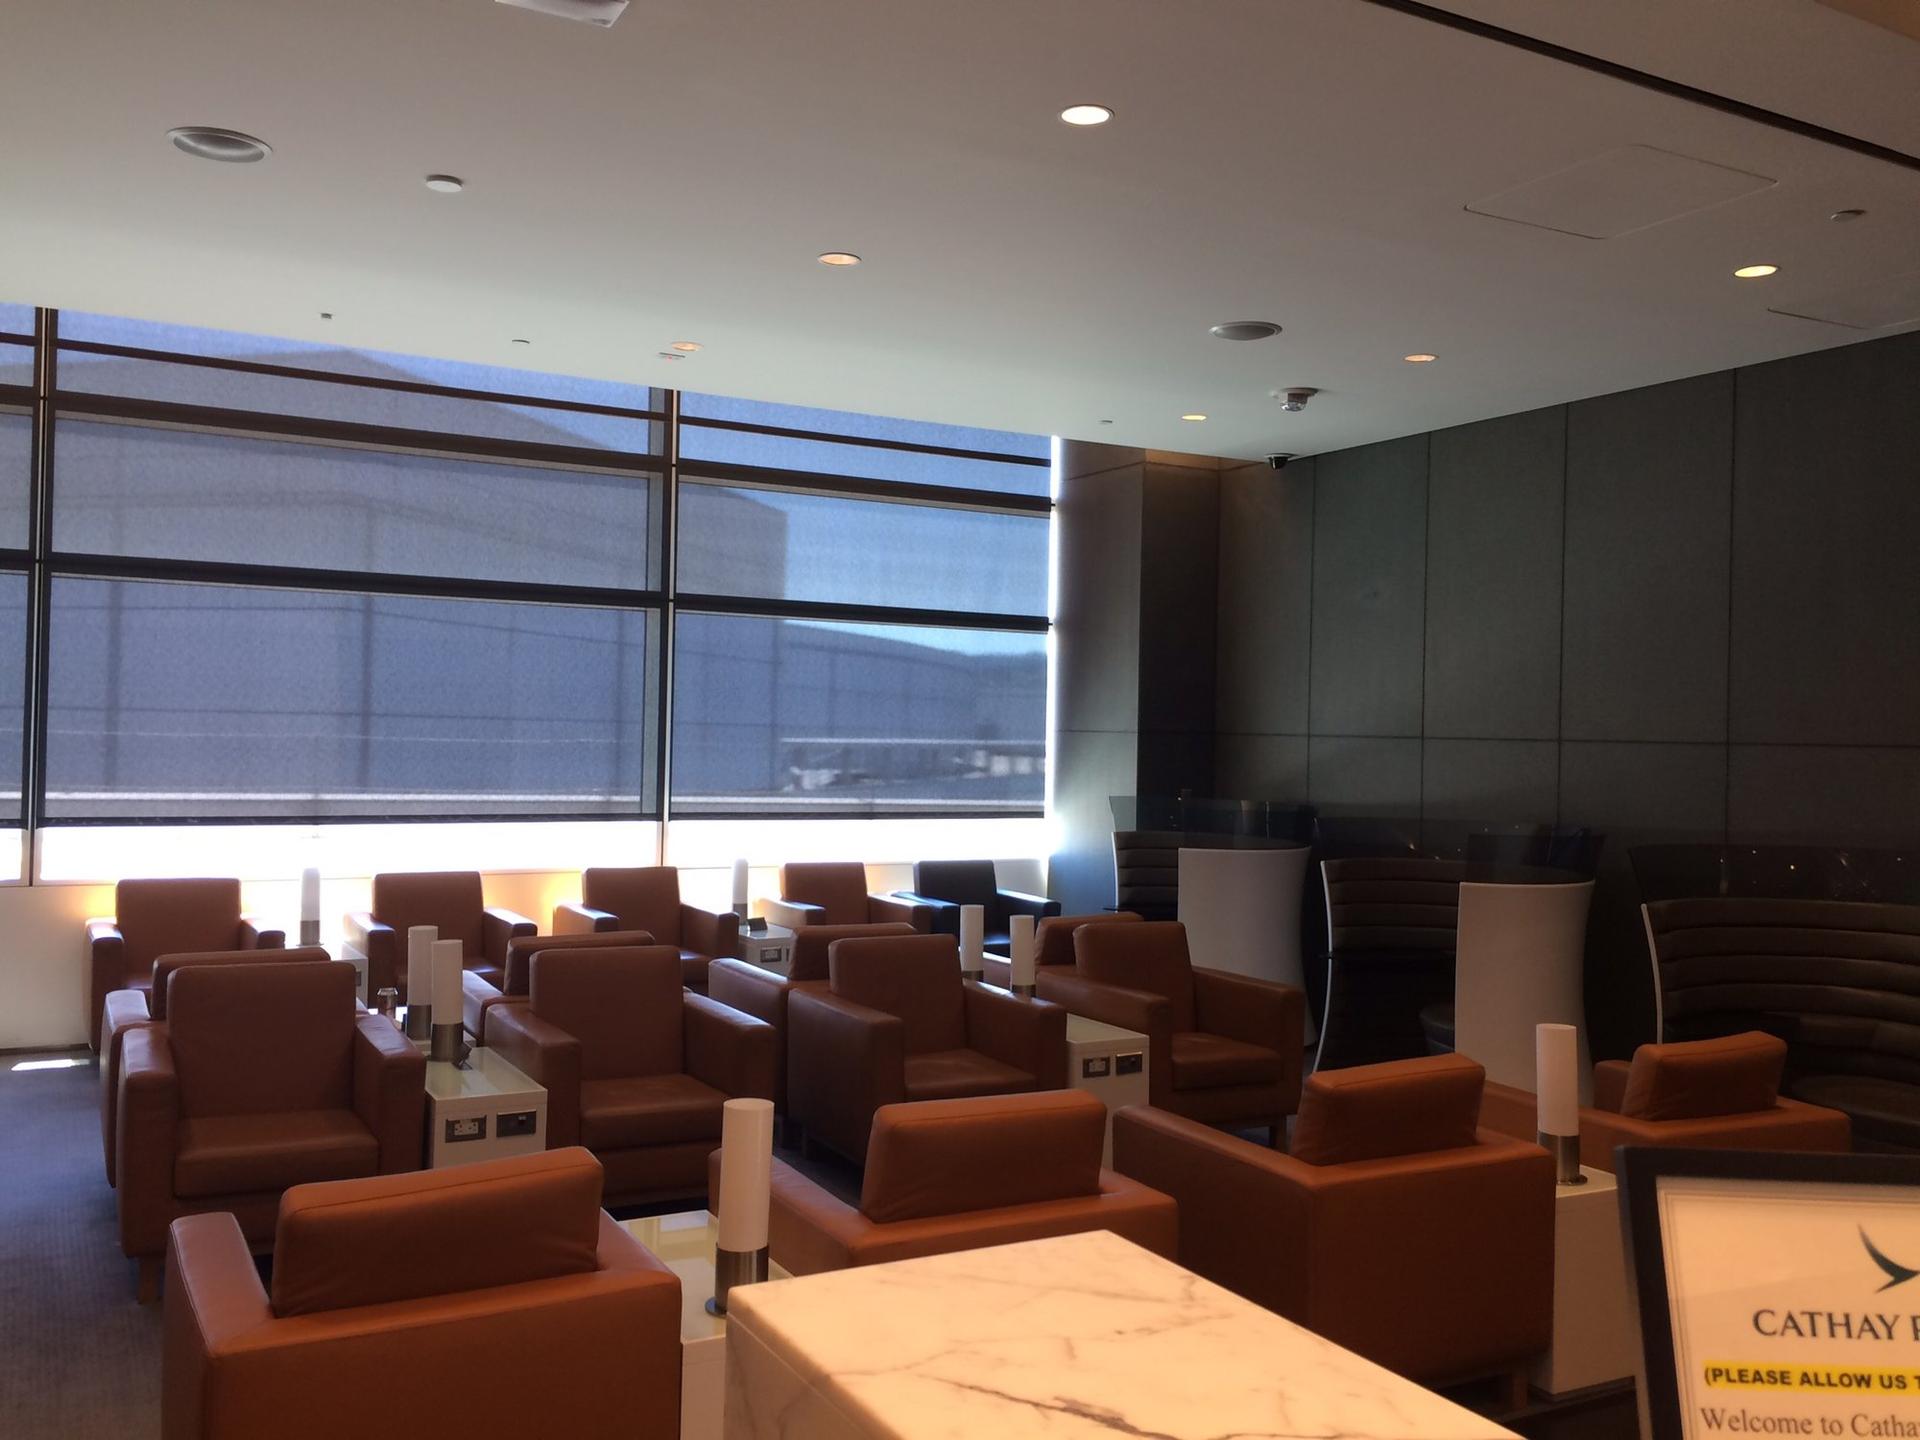 Cathay Pacific First and Business Class Lounge image 33 of 74